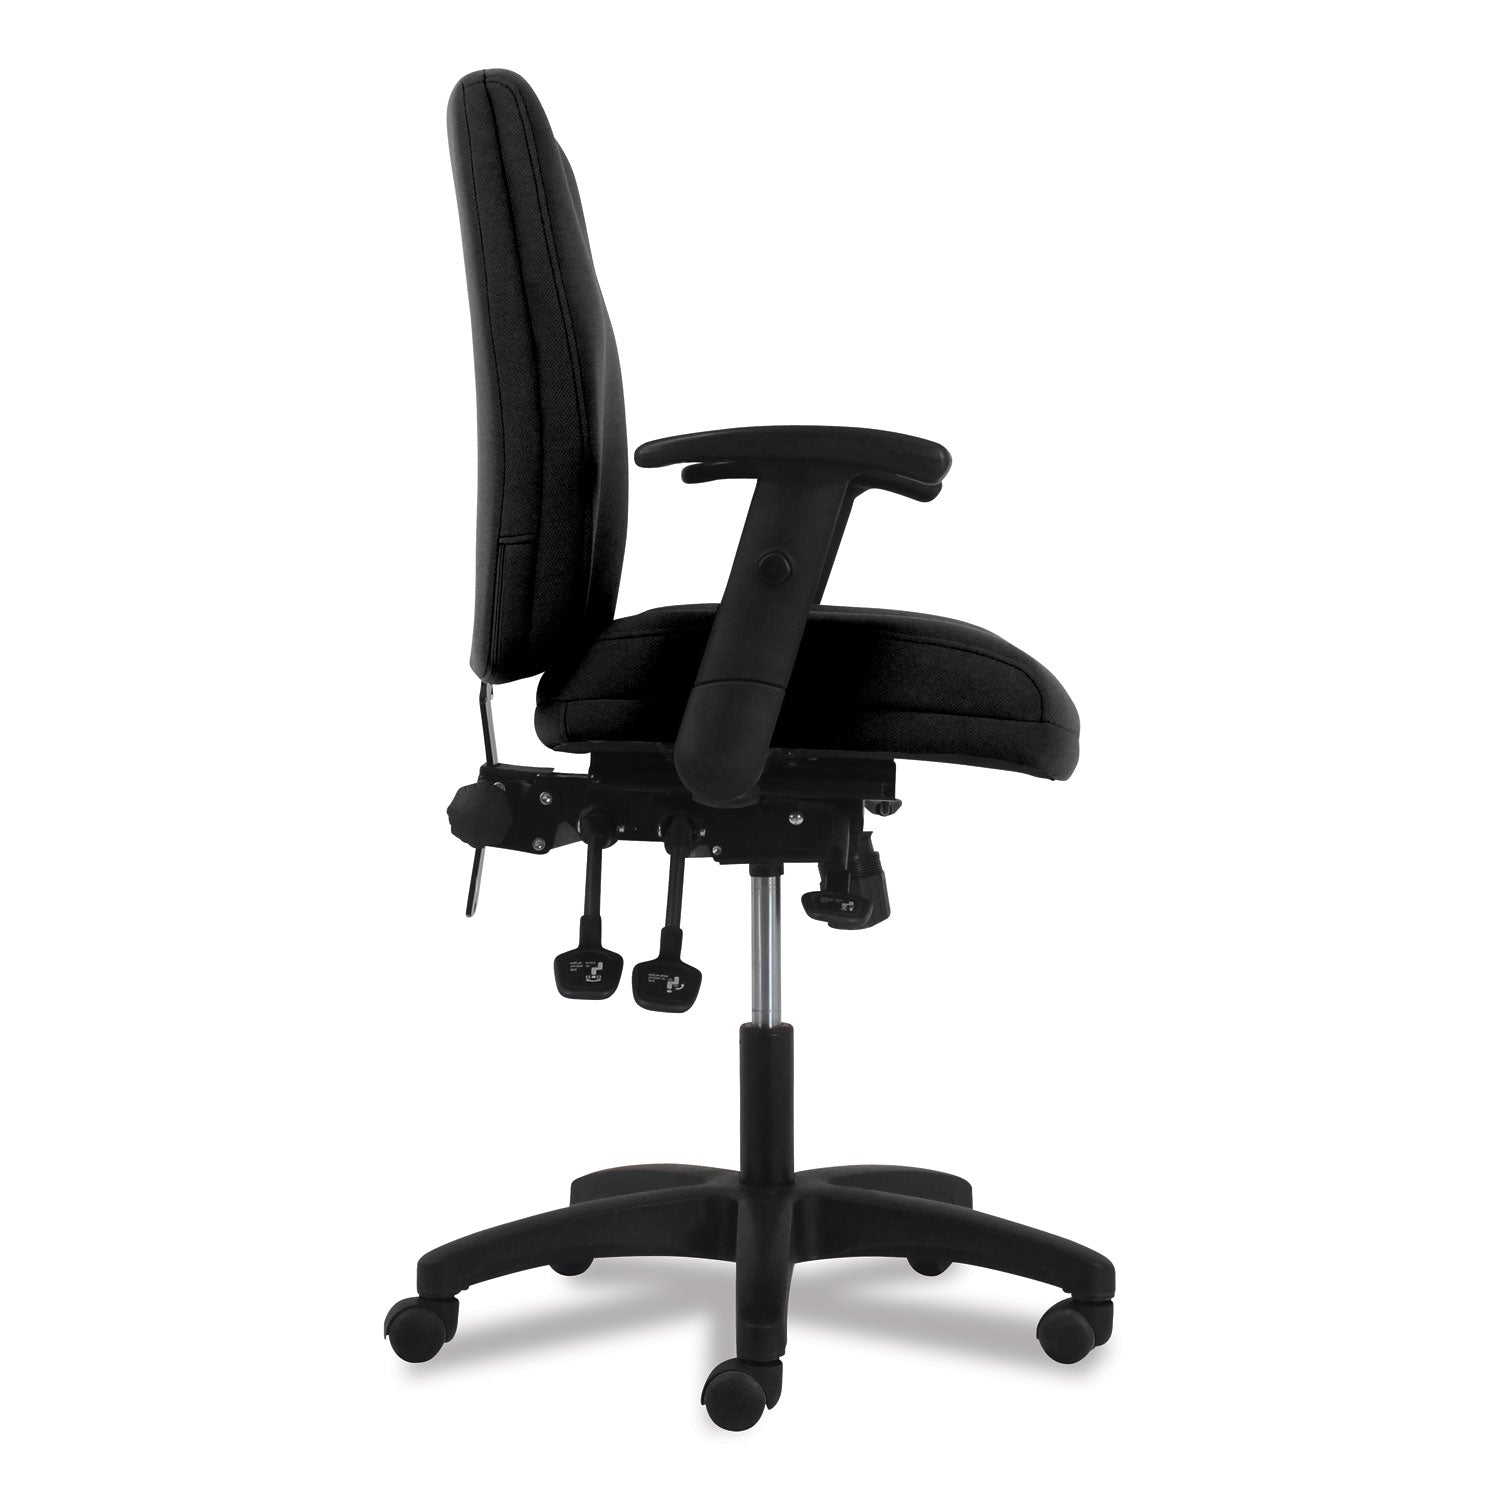 network-mid-back-task-chair-supports-up-to-250-lb-183-to-228-seat-height-black_honvl282a2va10t - 3